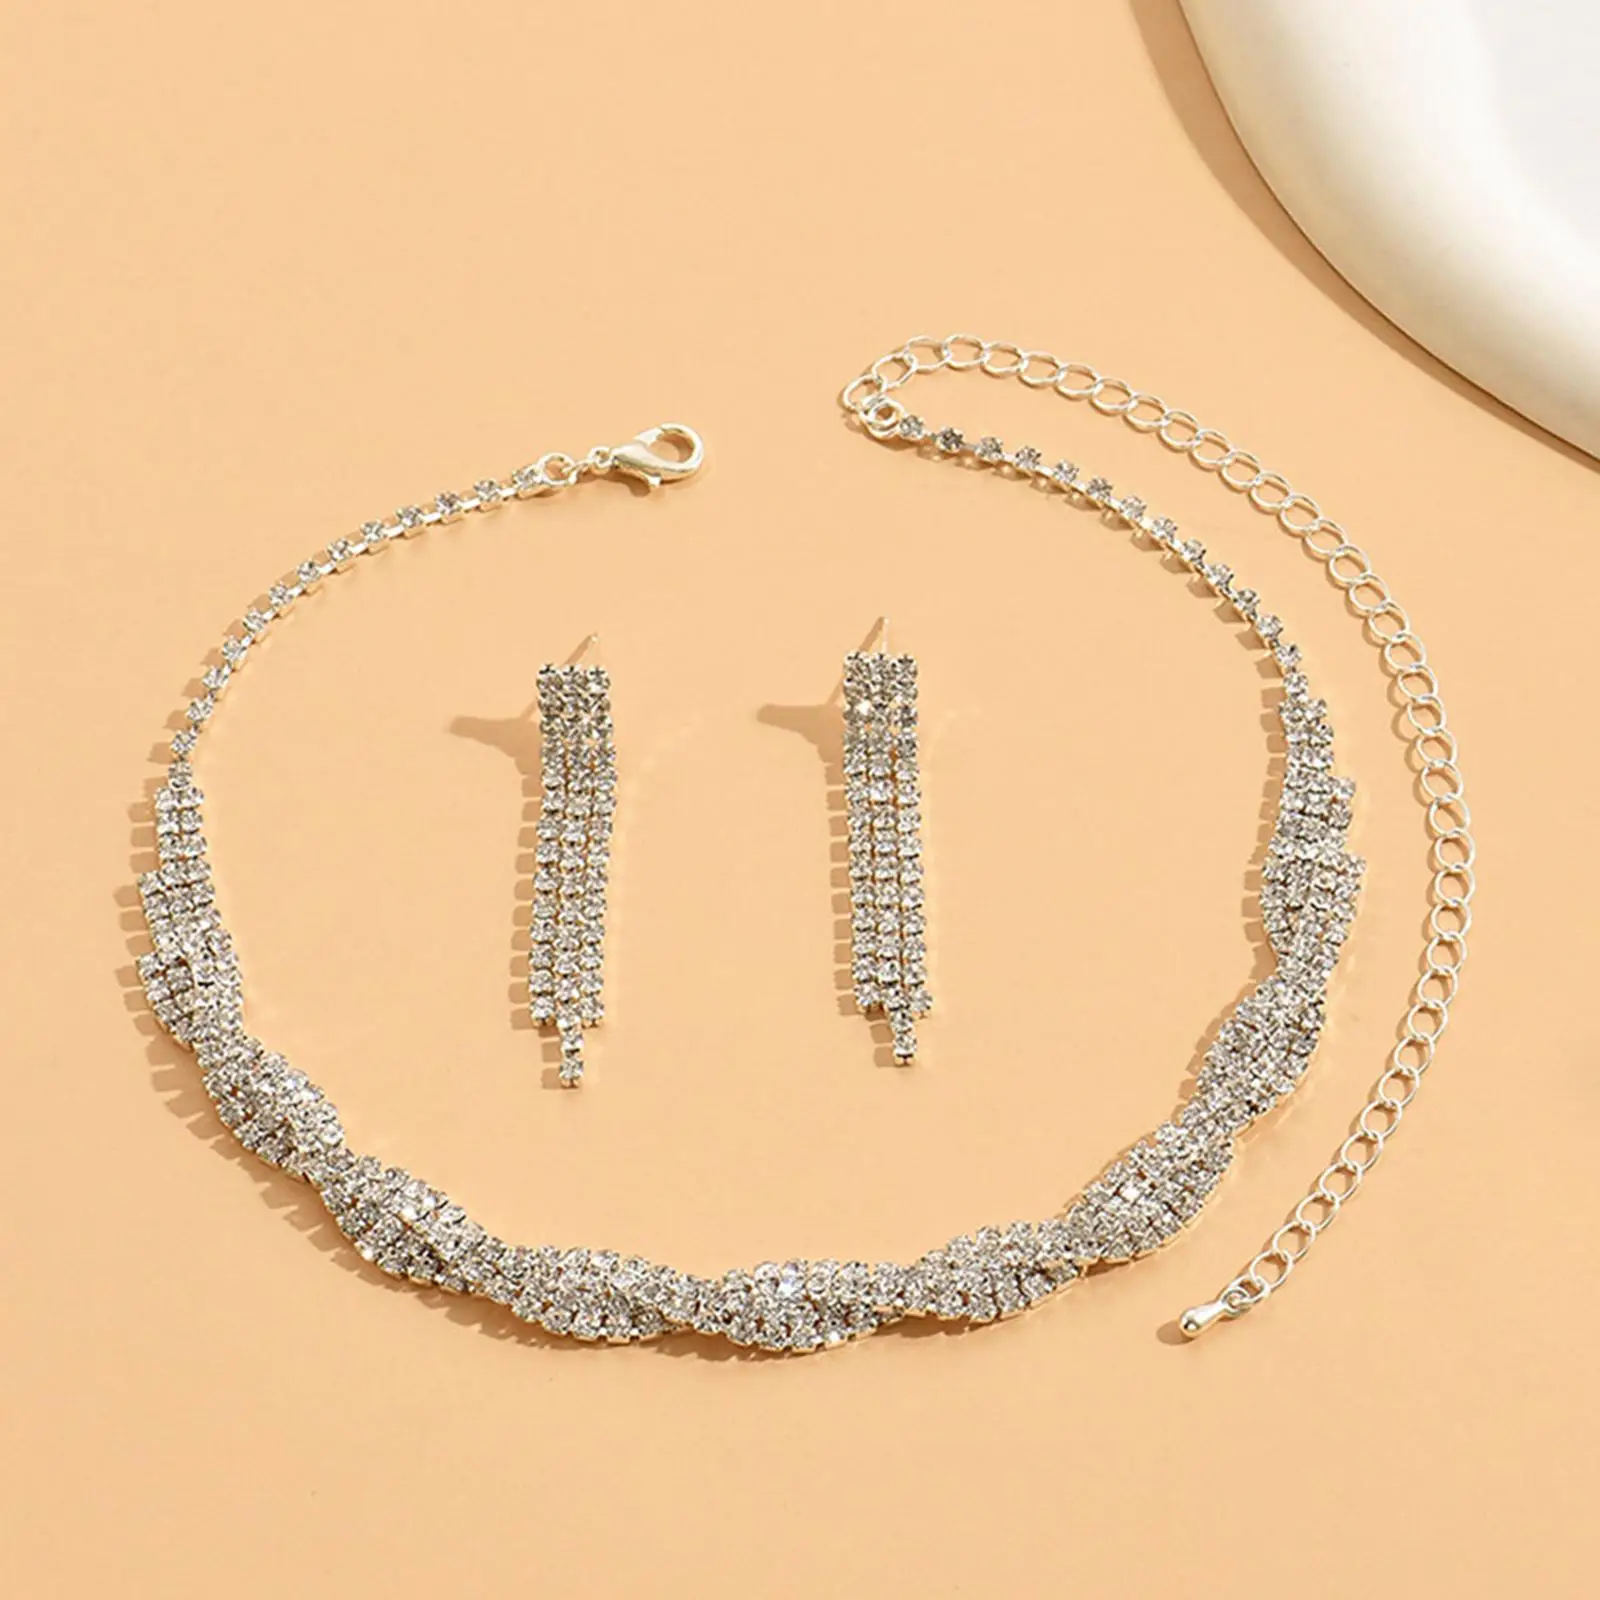 Rhinestone Necklace Earrings Trendy Ear Studs Chain Necklace Wedding Jewelry for Party Wedding Prom Costume Dating Engagement